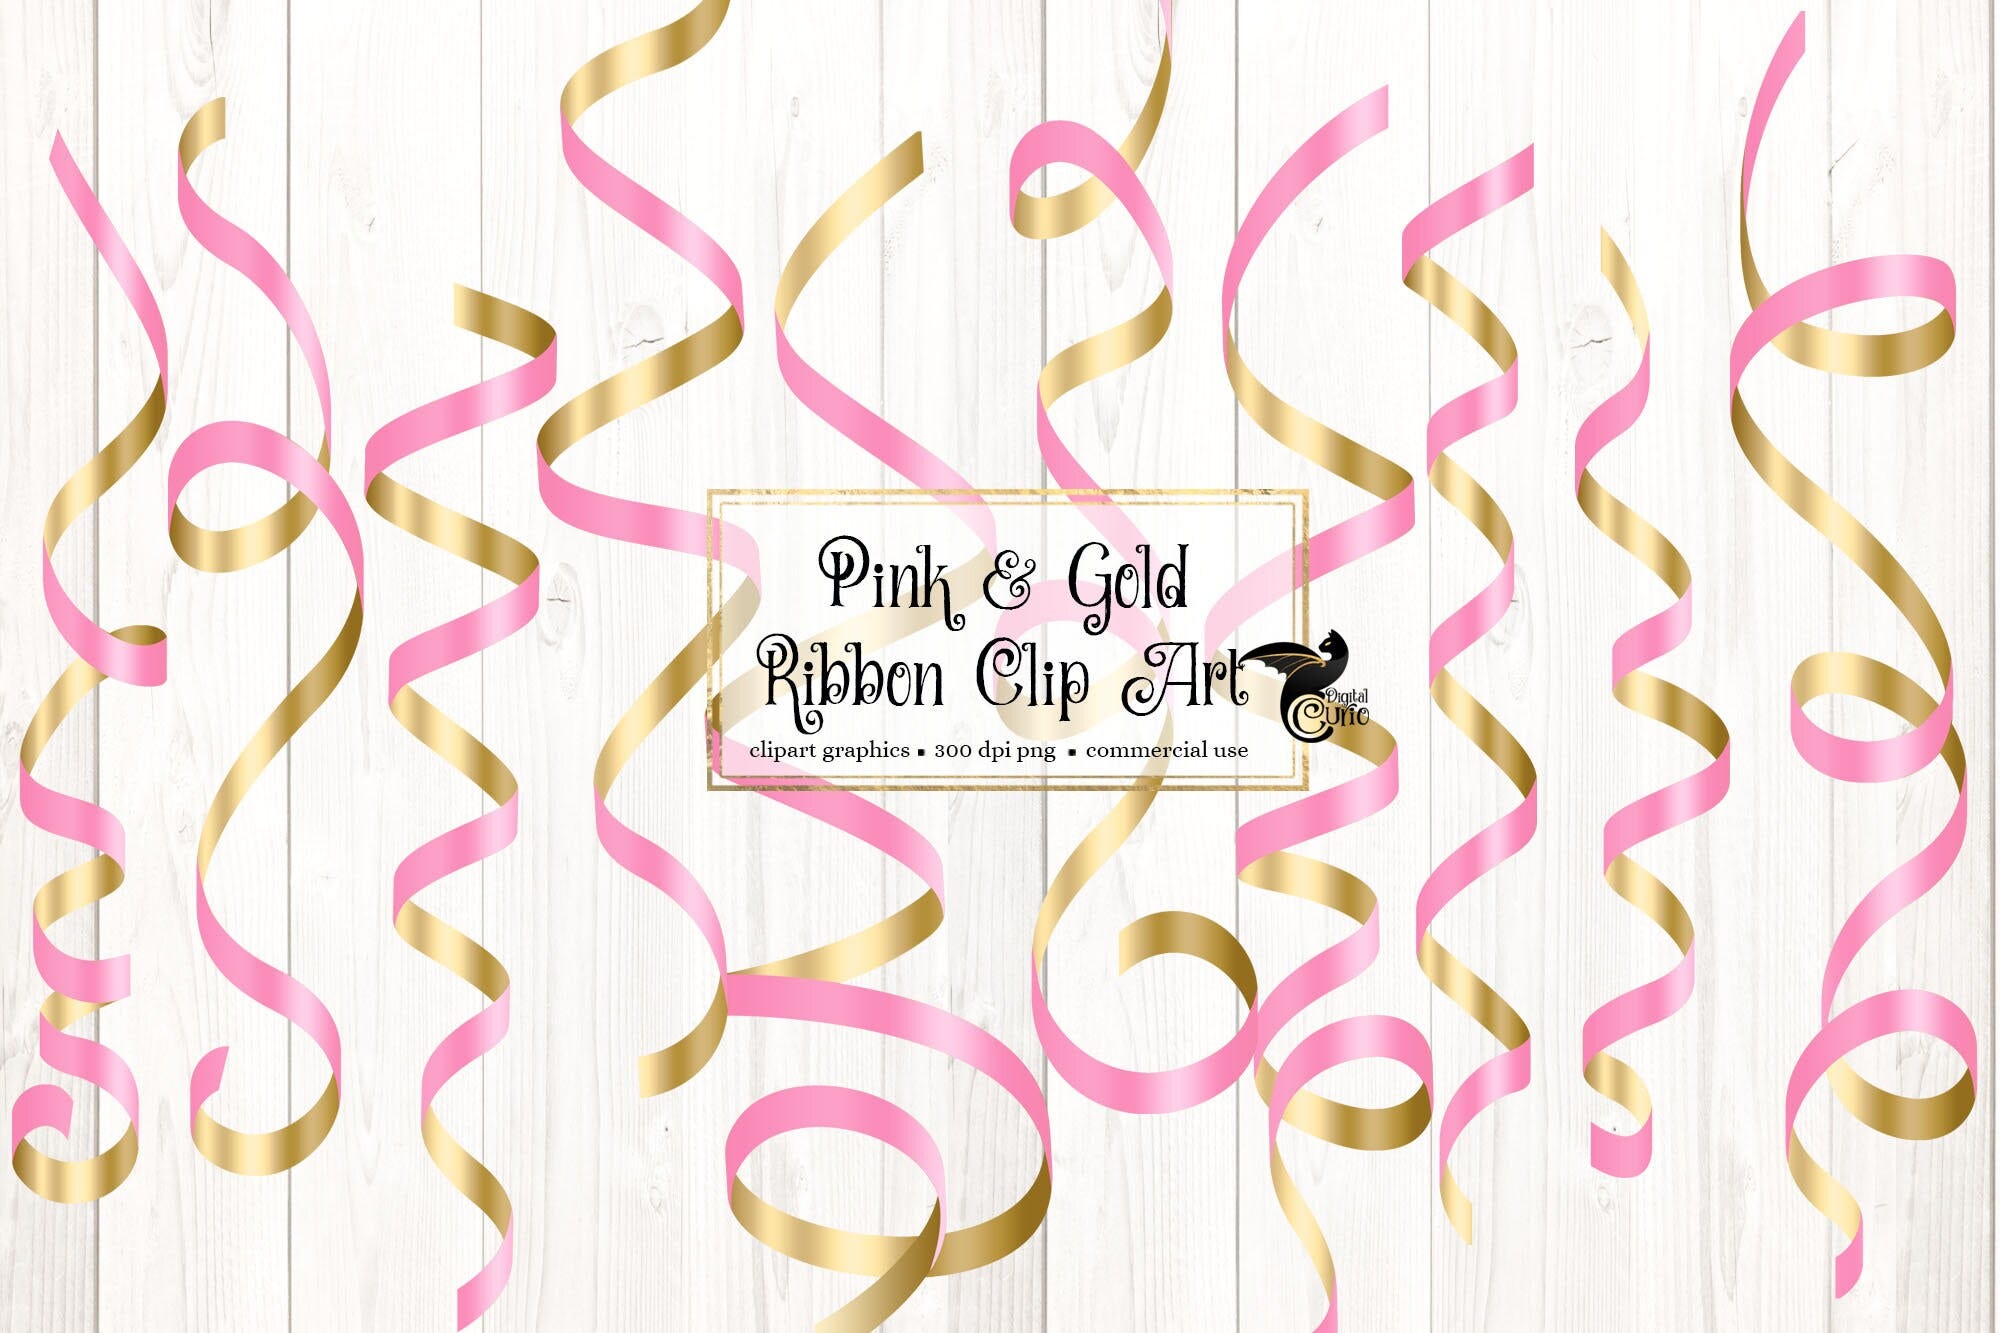 Pink and Gold Ribbon Clip Art - curling ribbons in png format instant download for commercial use